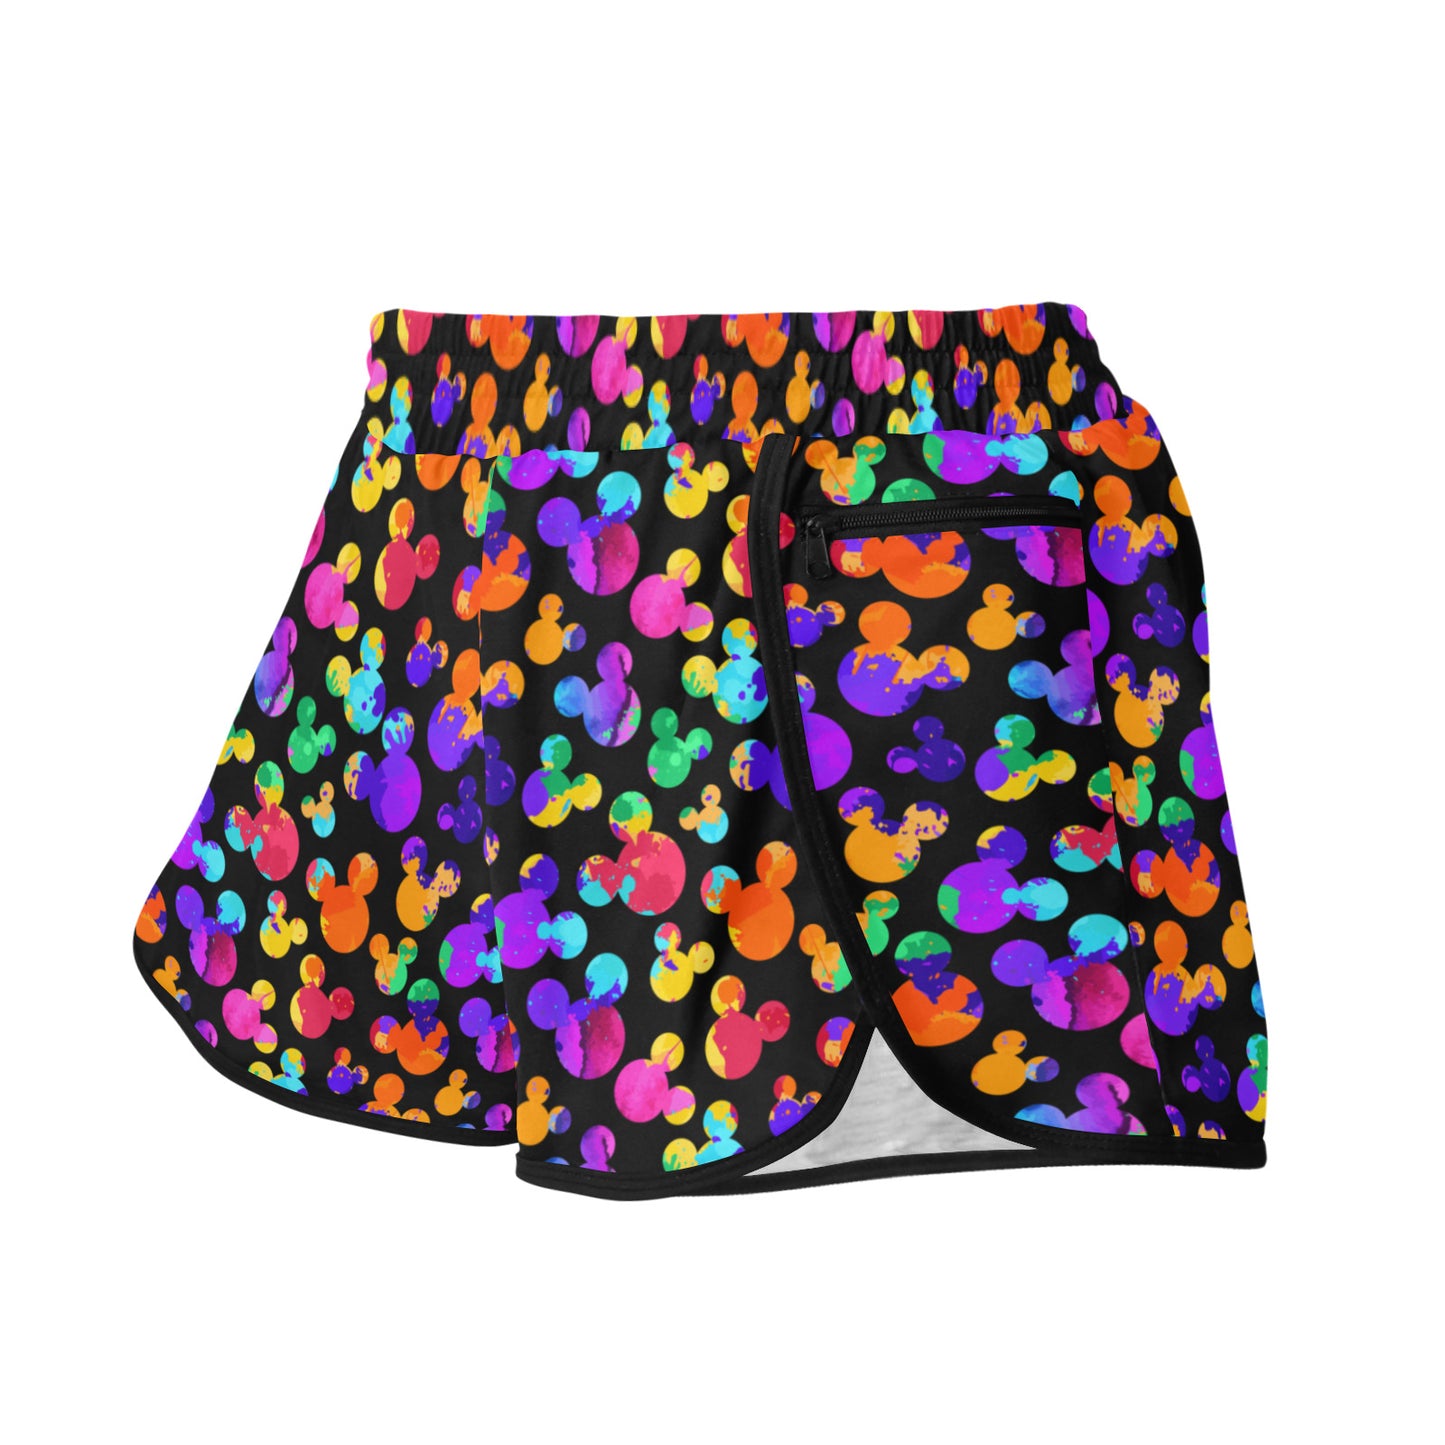 Watercolor Women's Athletic Sports Shorts